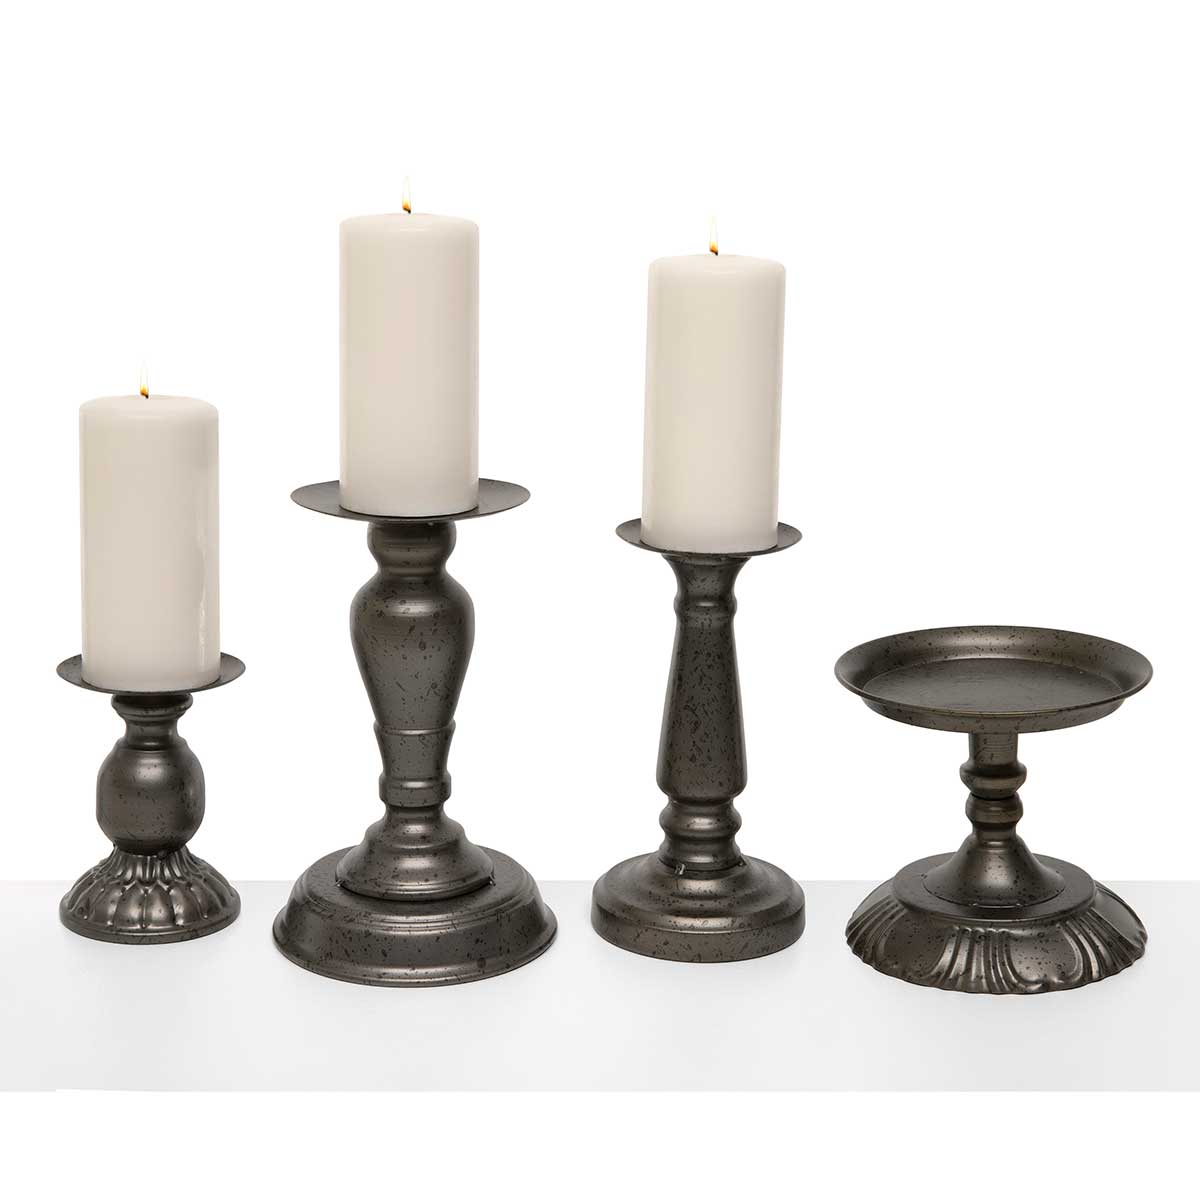 CANDLEHOLDER PEWTER MEDIUM 4.5IN X 8.5IN METAL - Click Image to Close